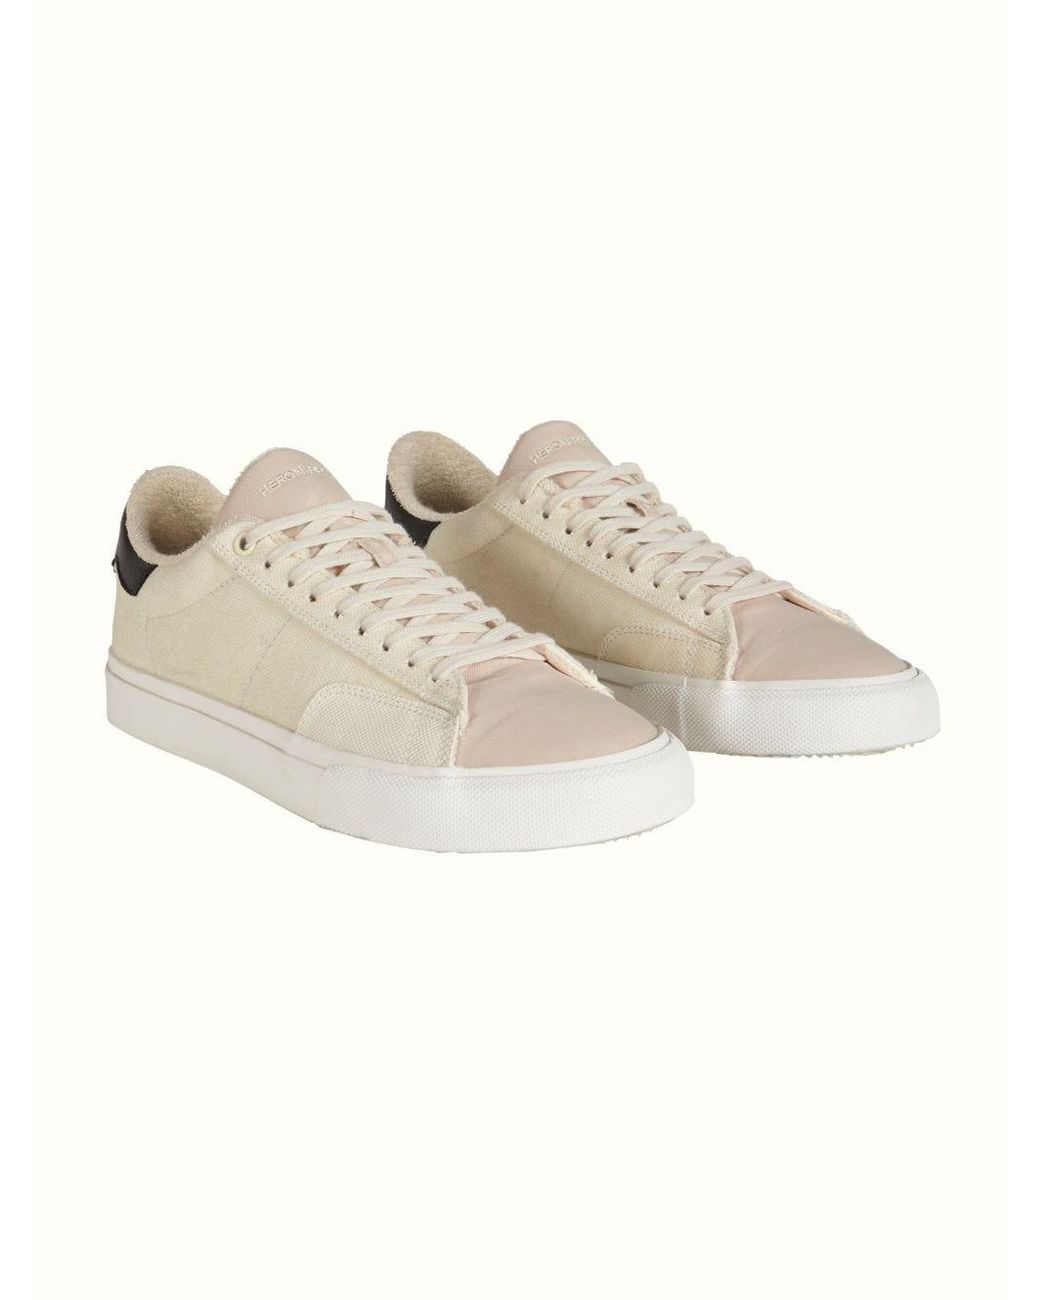 Heron Preston Vulcanized Low Top Canvas Sneakers in Cream White White Mens Shoes Trainers Low-top trainers Save 41% for Men 